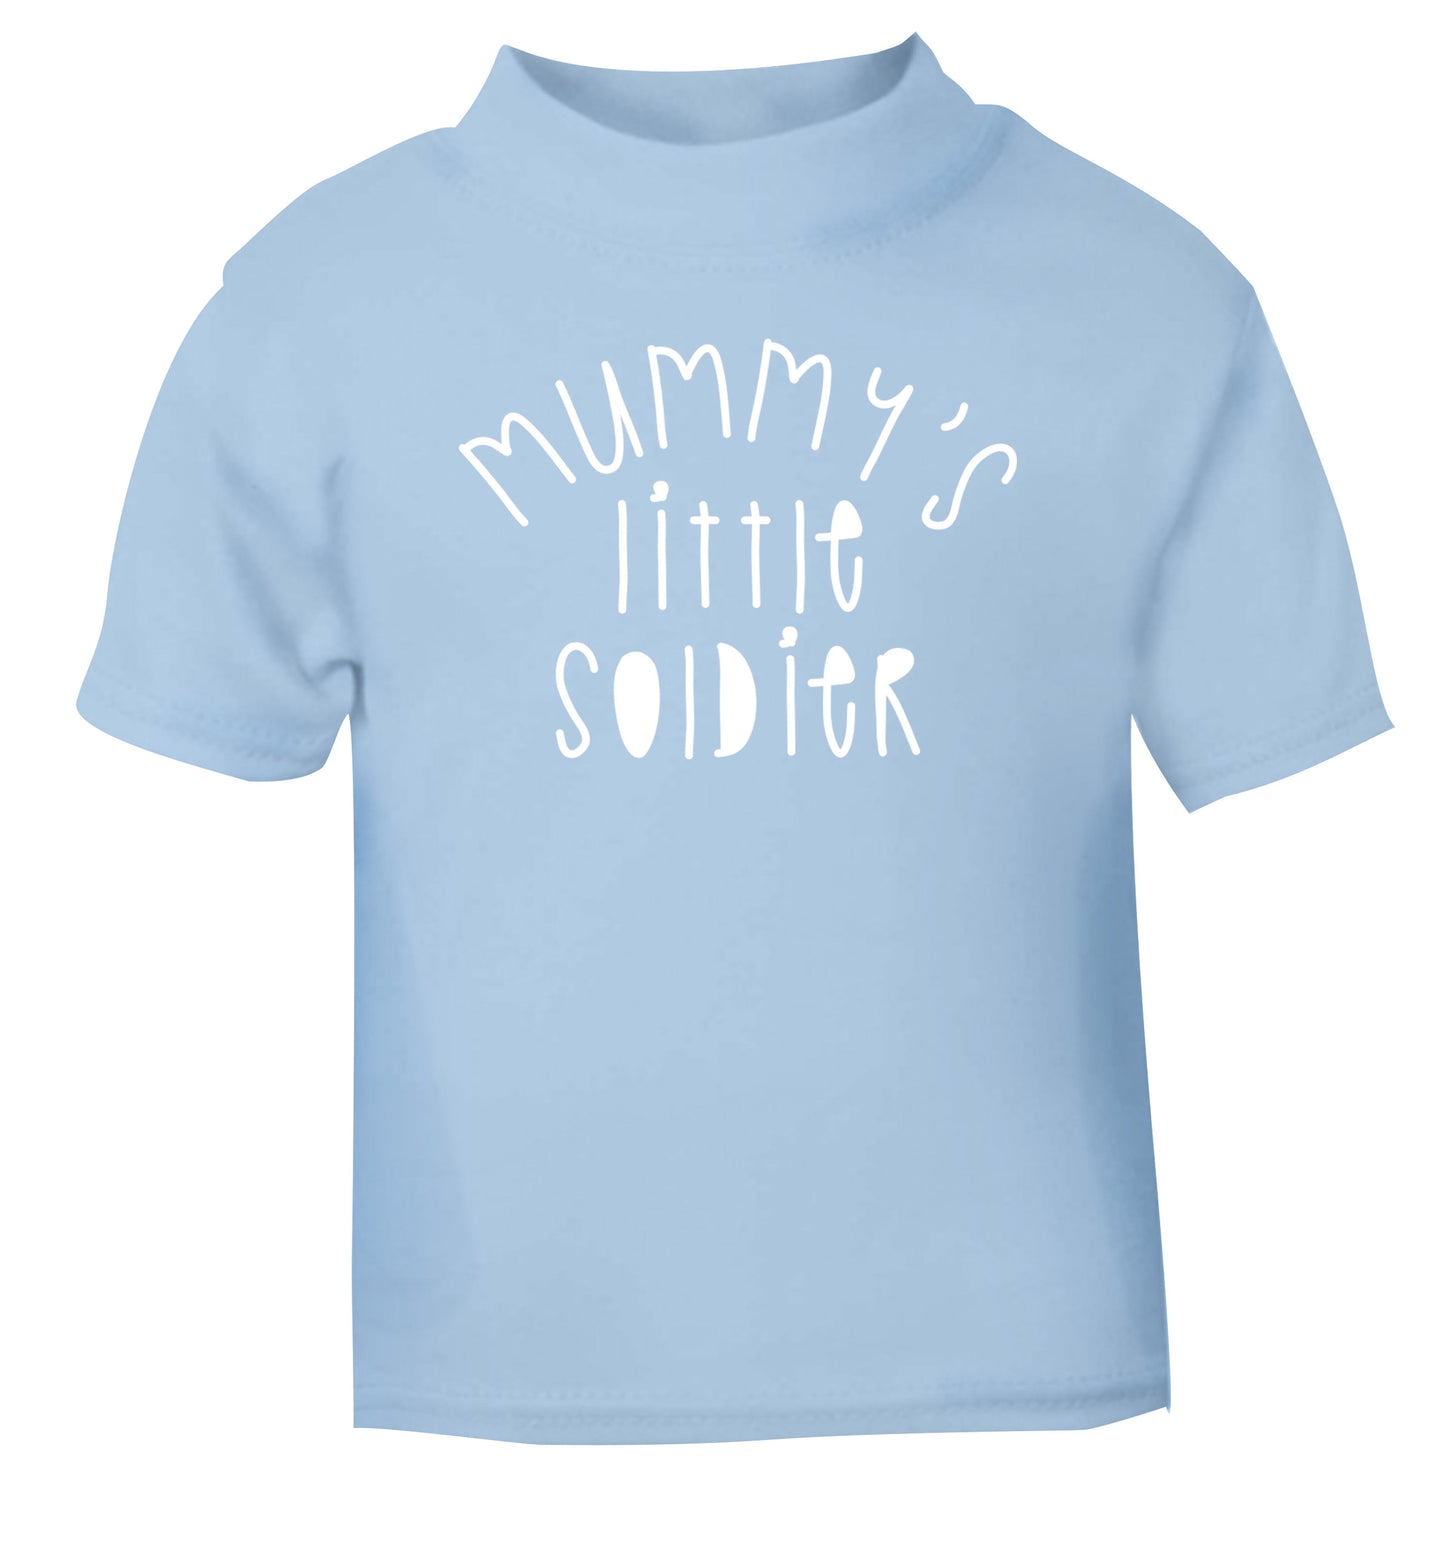 Mummy's little soldier light blue Baby Toddler Tshirt 2 Years